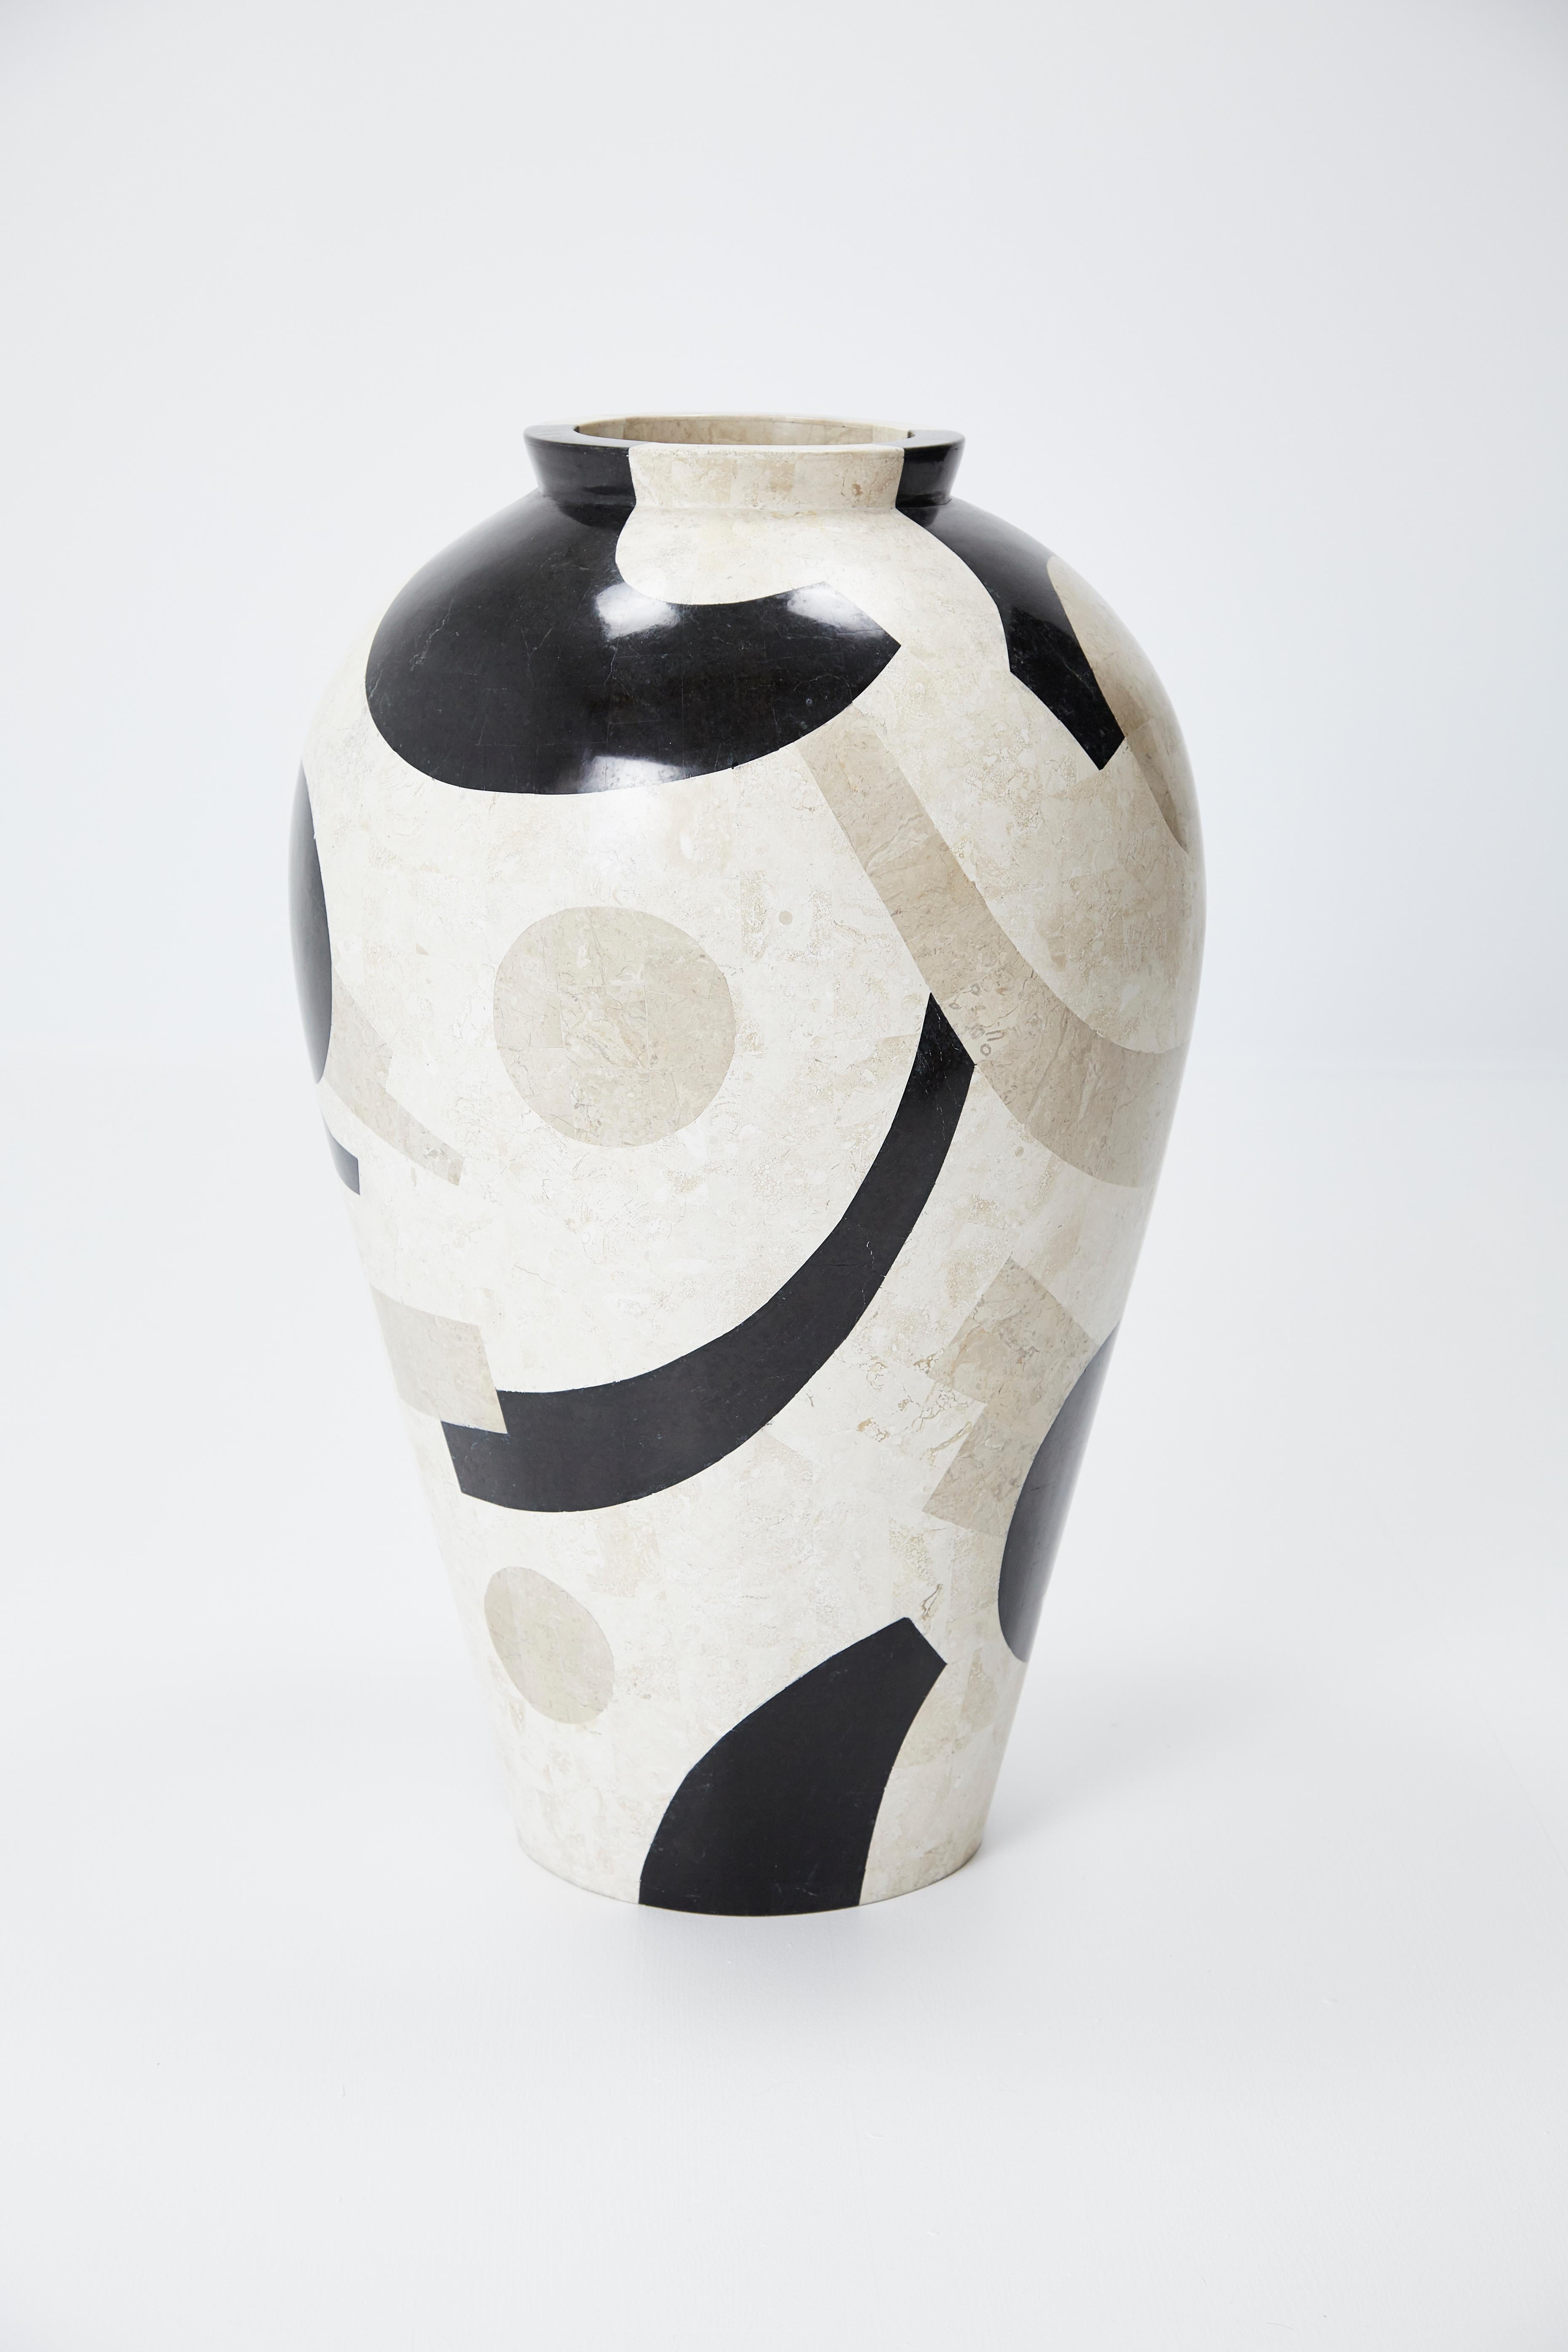 Large mango jar executed in fiberglass with black, cream, and tan tessellated stone covering the exterior in a fun postmodern pattern. Excellent size for a floor vase or planter. Measures 30 in. tall.

All furnishings are made from 100% natural